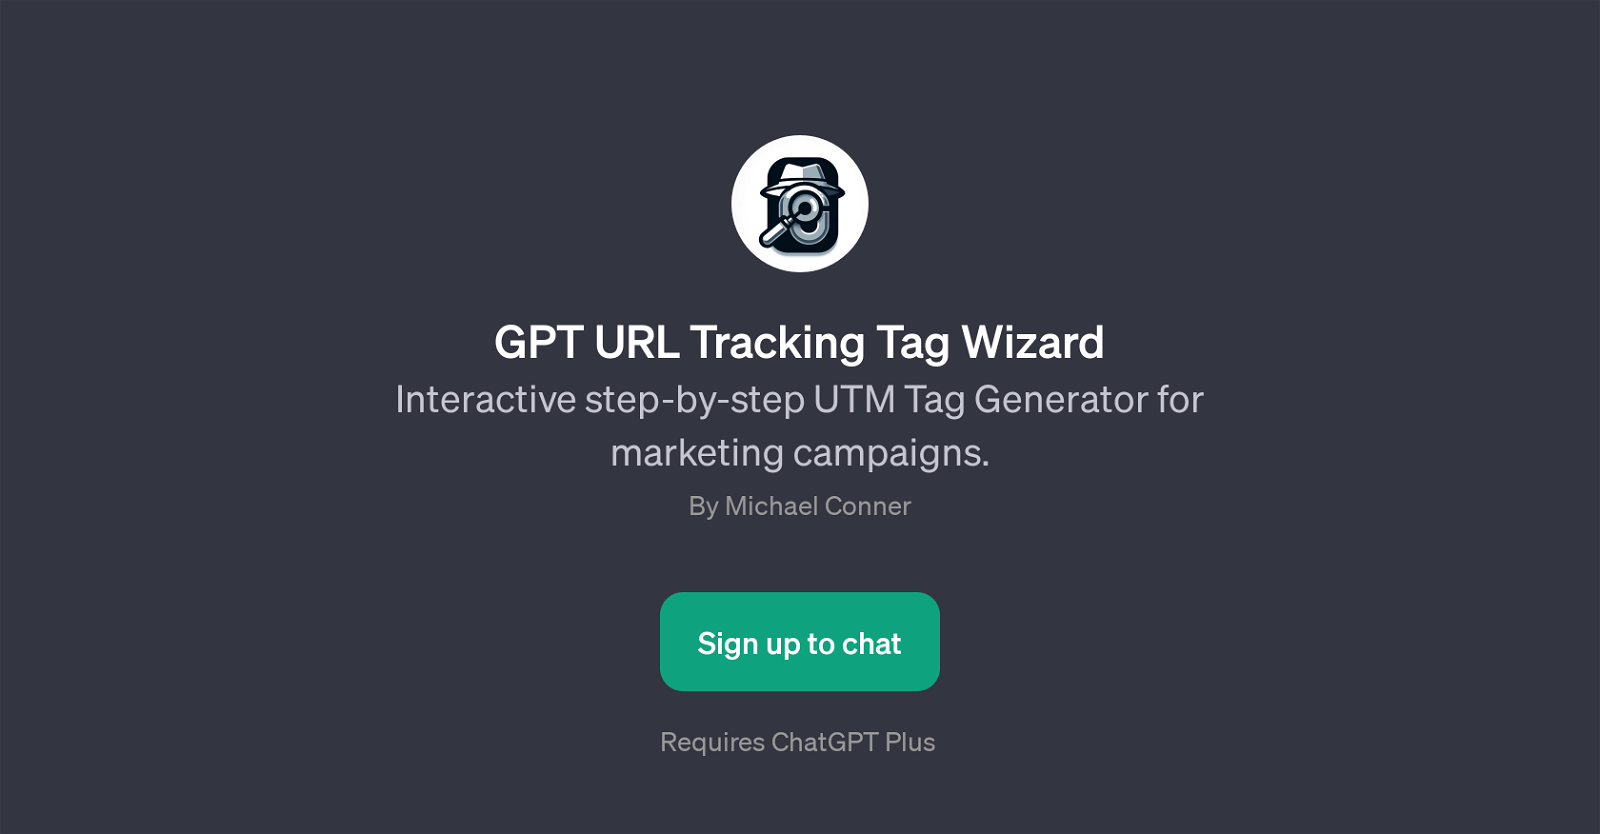 GPT URL Tracking Tag Wizard website